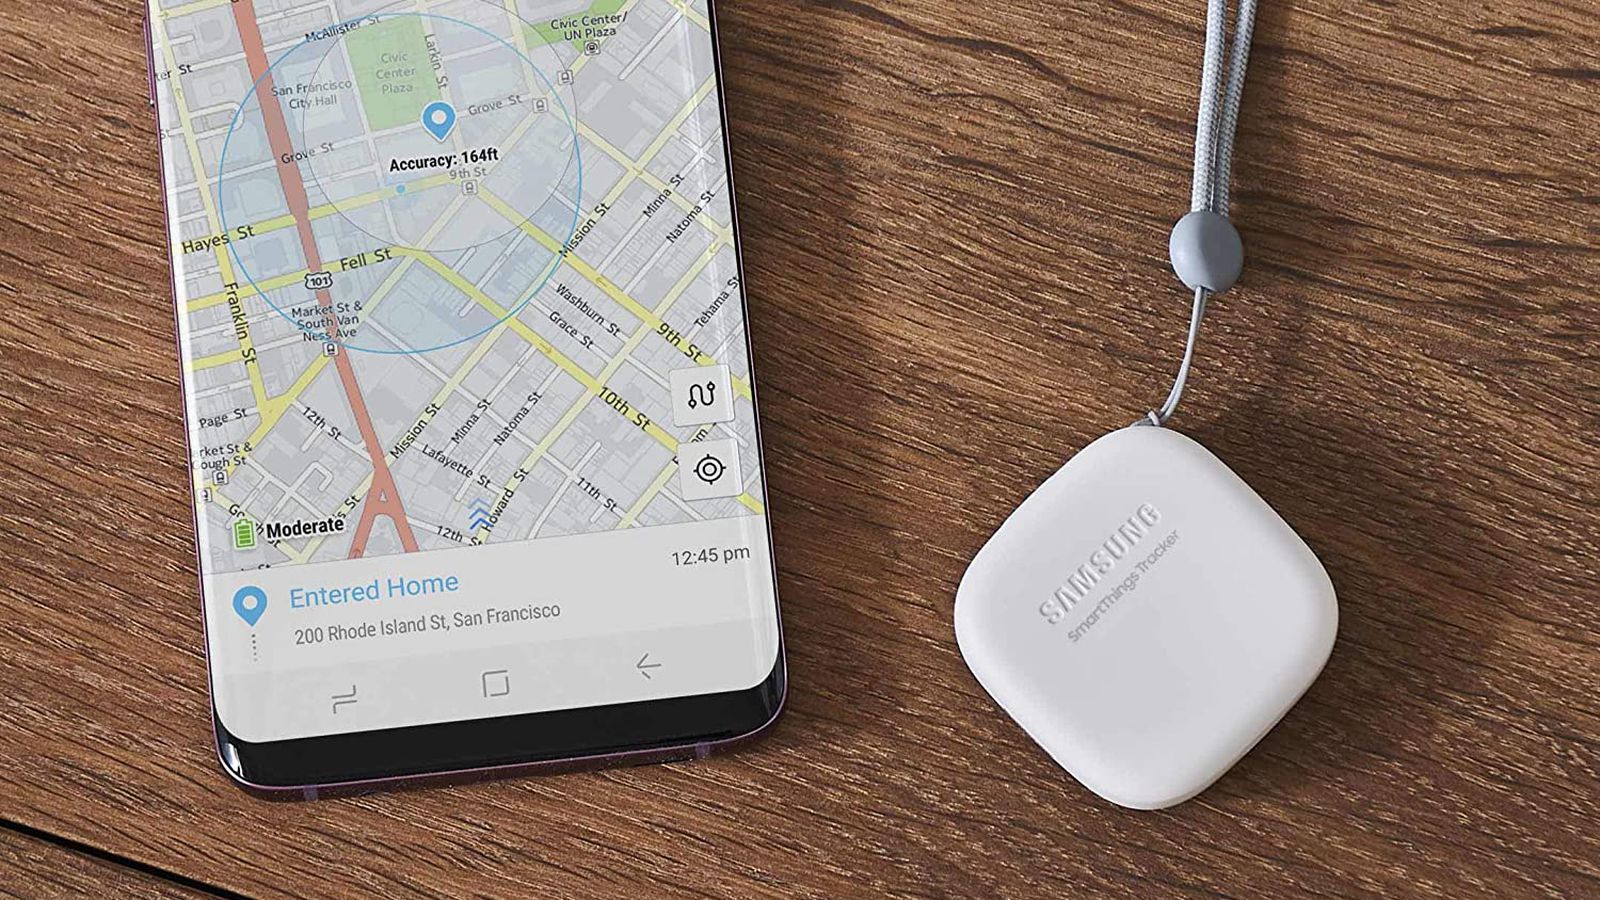 Samsung Reportedly Developing 'Galaxy Smart Tag' Rival to Apple